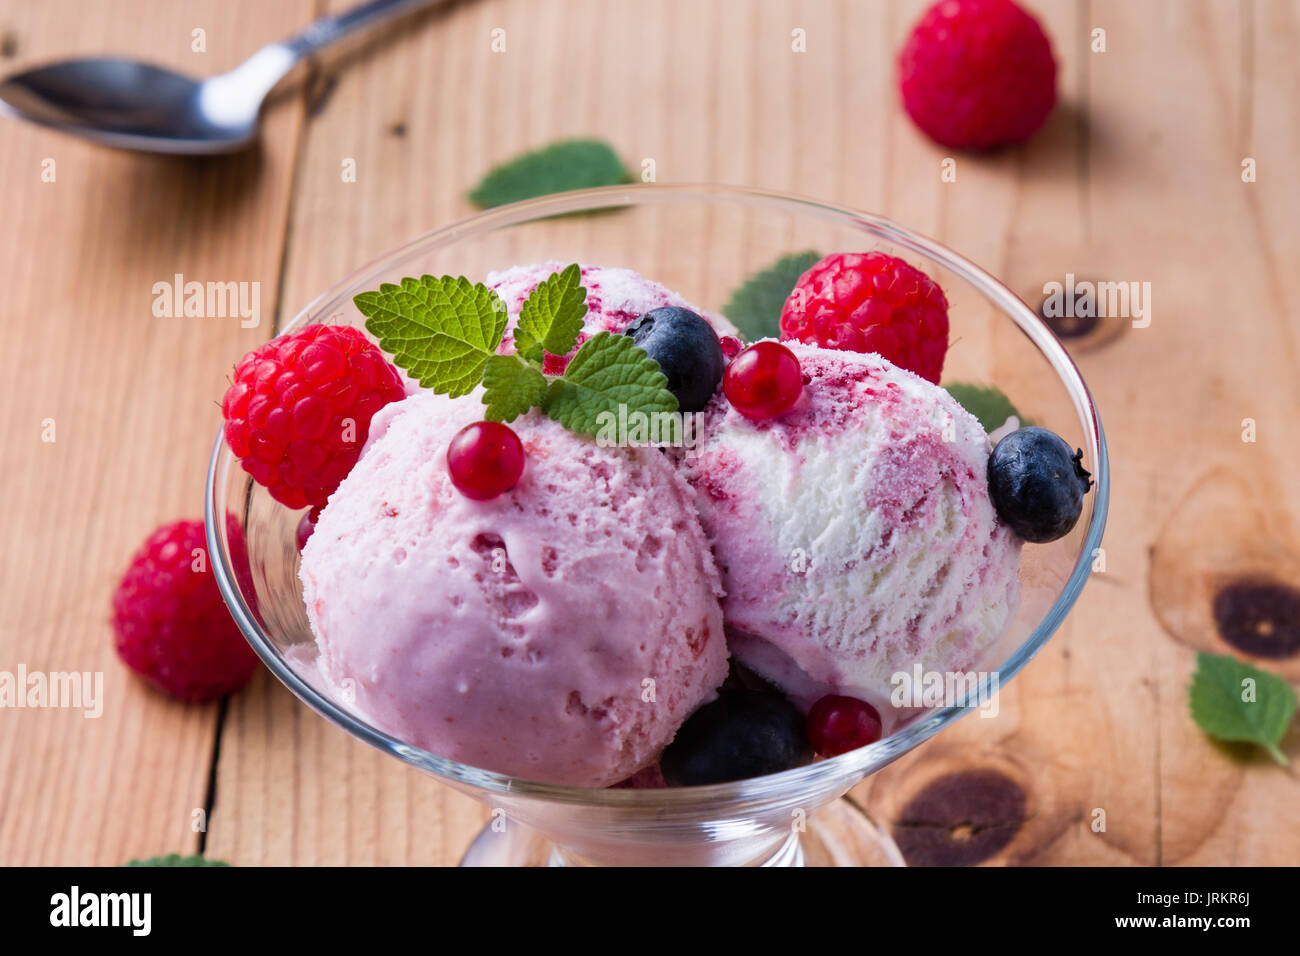 fruit flavored ice cream in glass bowl Stock Photo